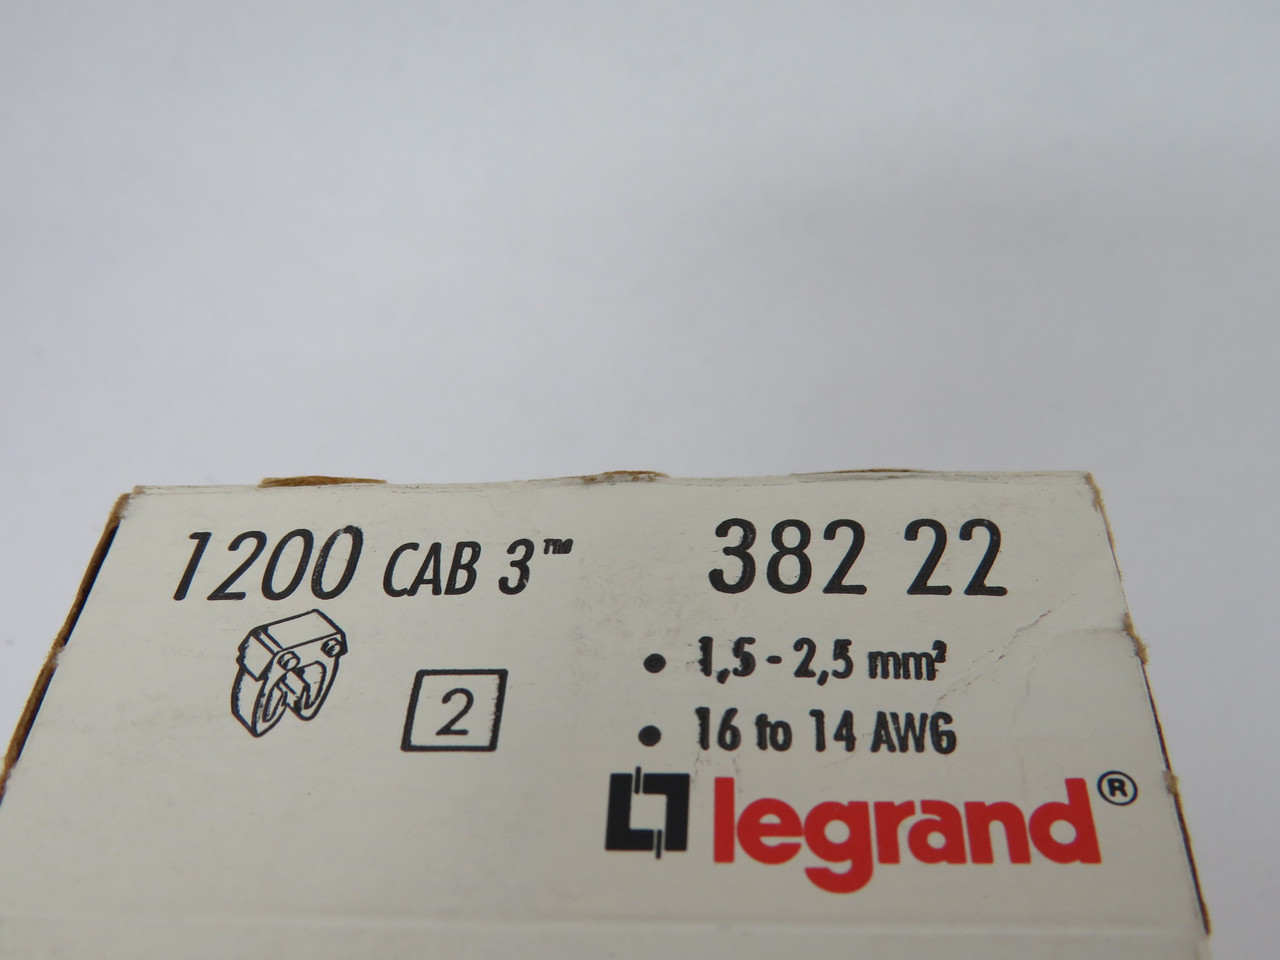 Legrand 38222 CAB3 Red Wire Marker Sleeve "2" 1.5-2.5mm2 Lot of 627 NEW